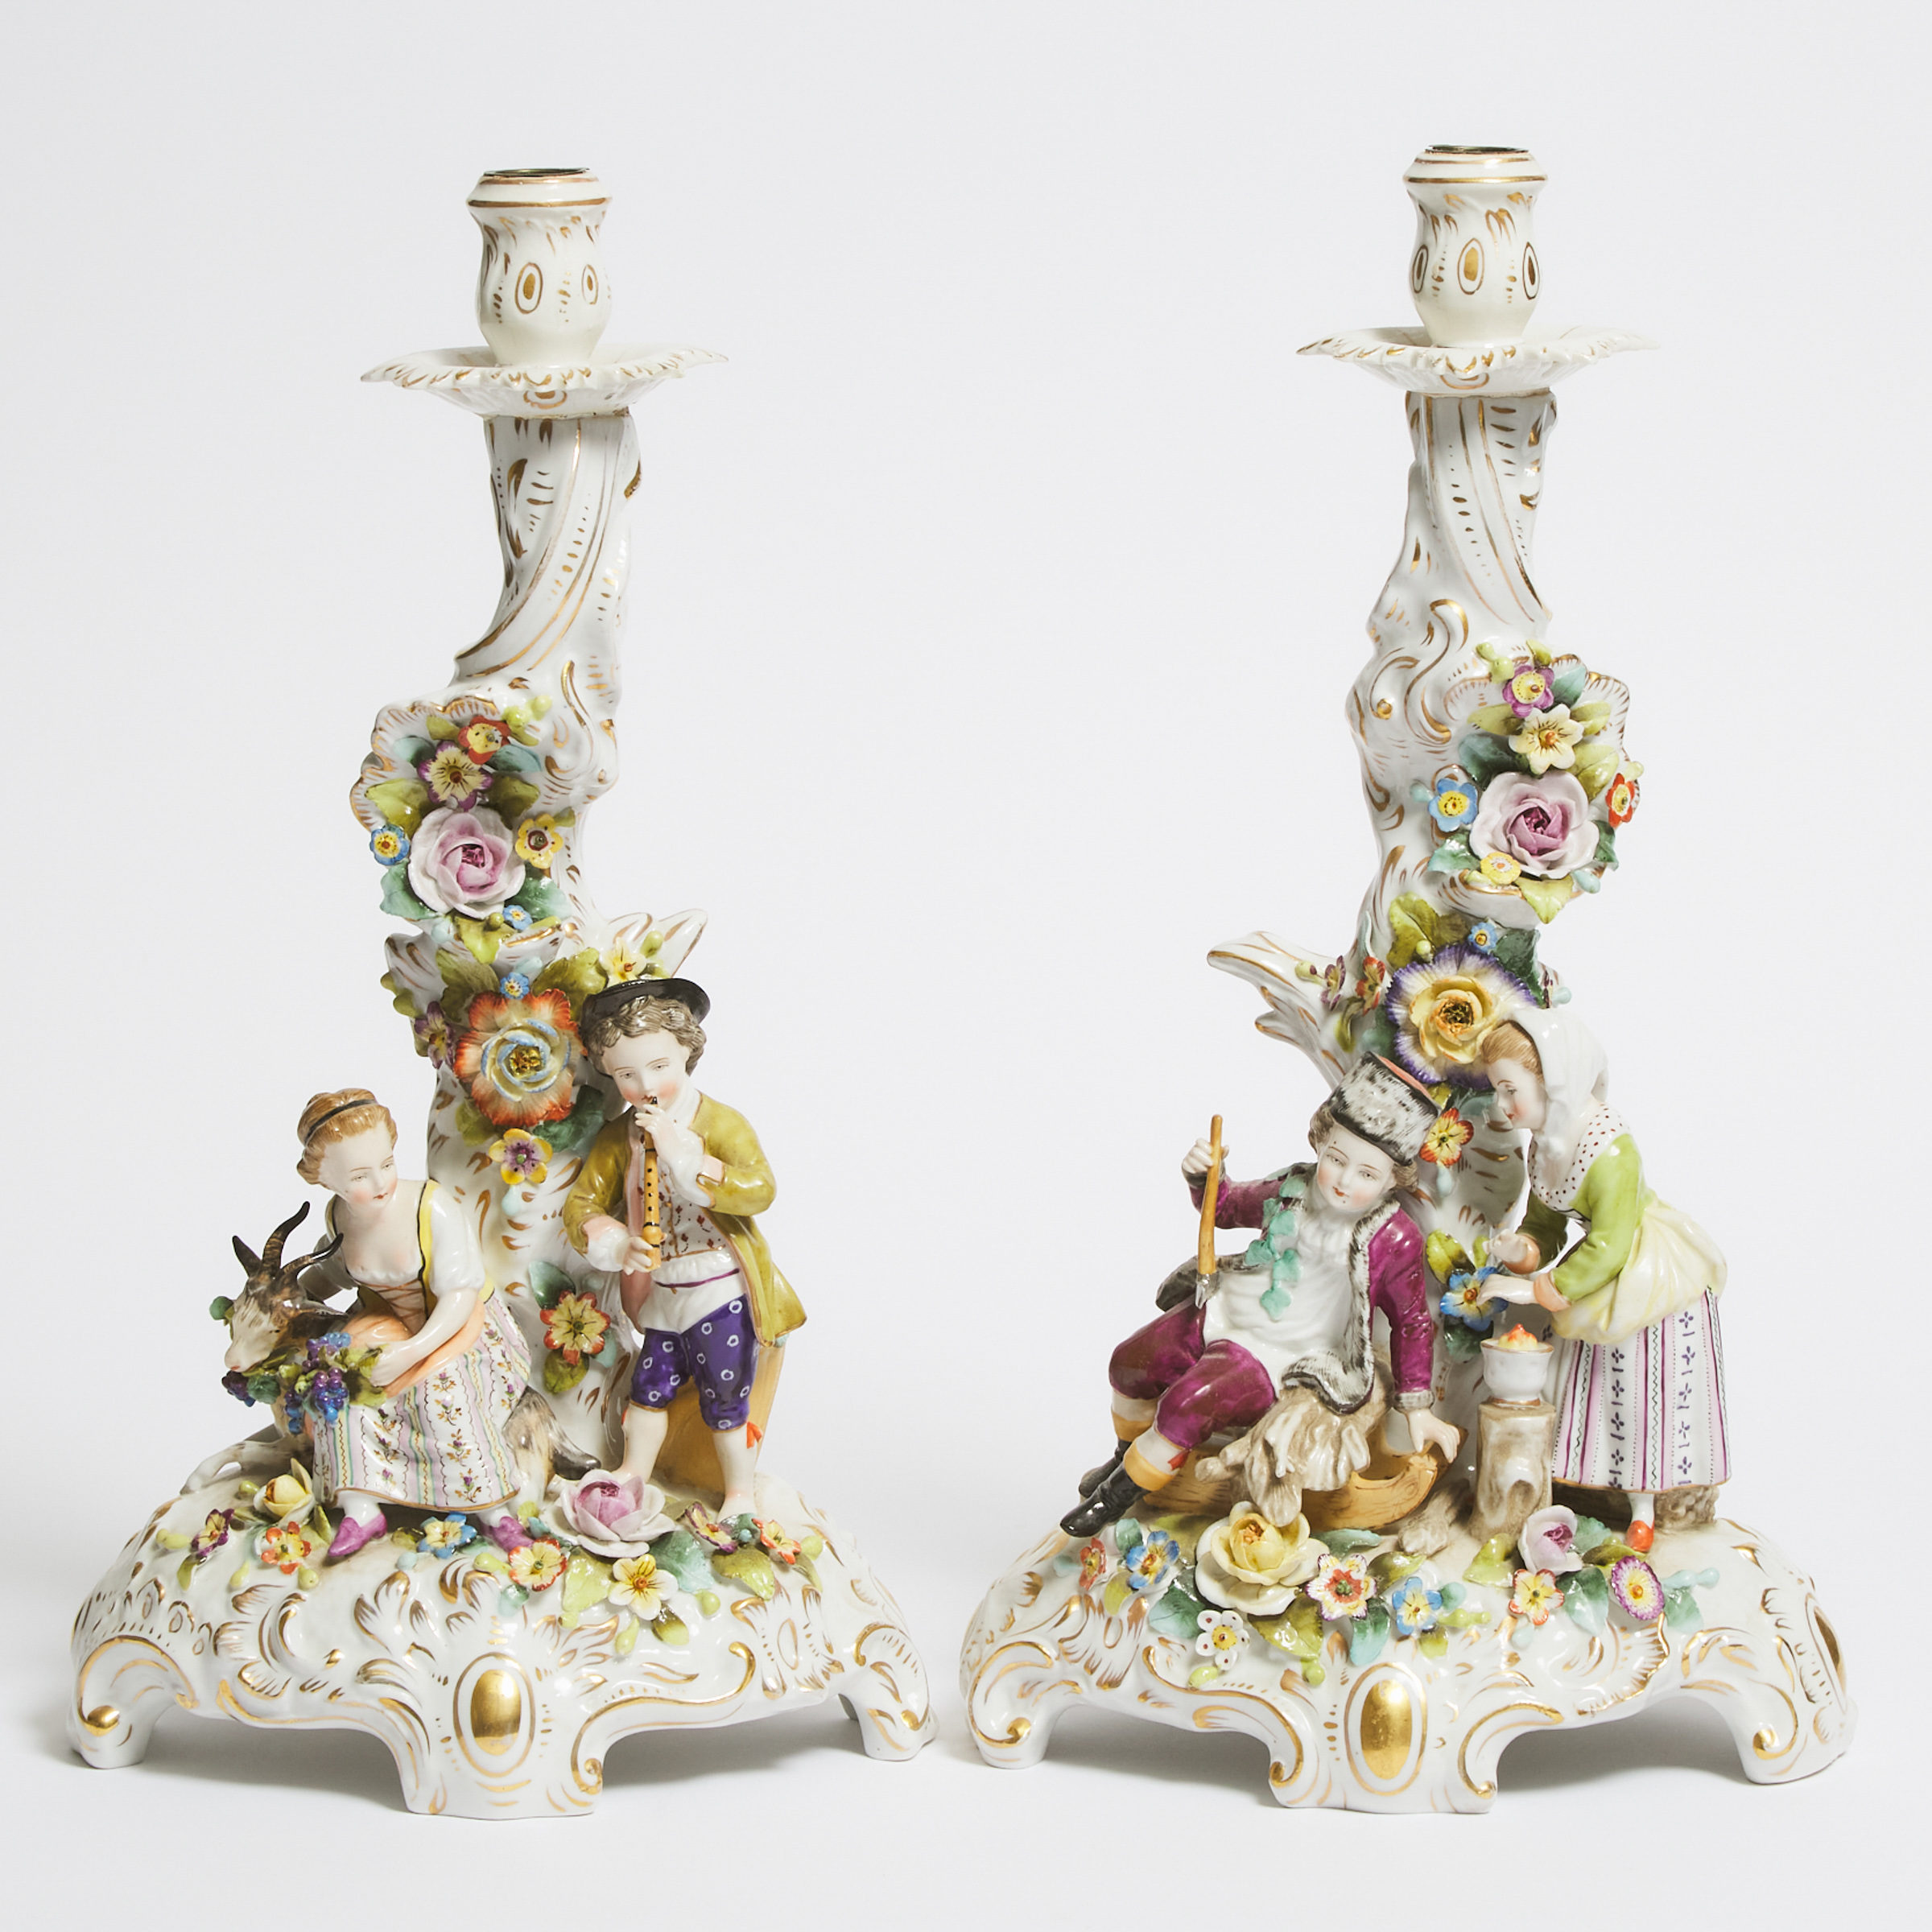 Pair of German Porcelain Candlestick Figure Groups of 'Winter' and 'Summer', late 19th/early 20th century